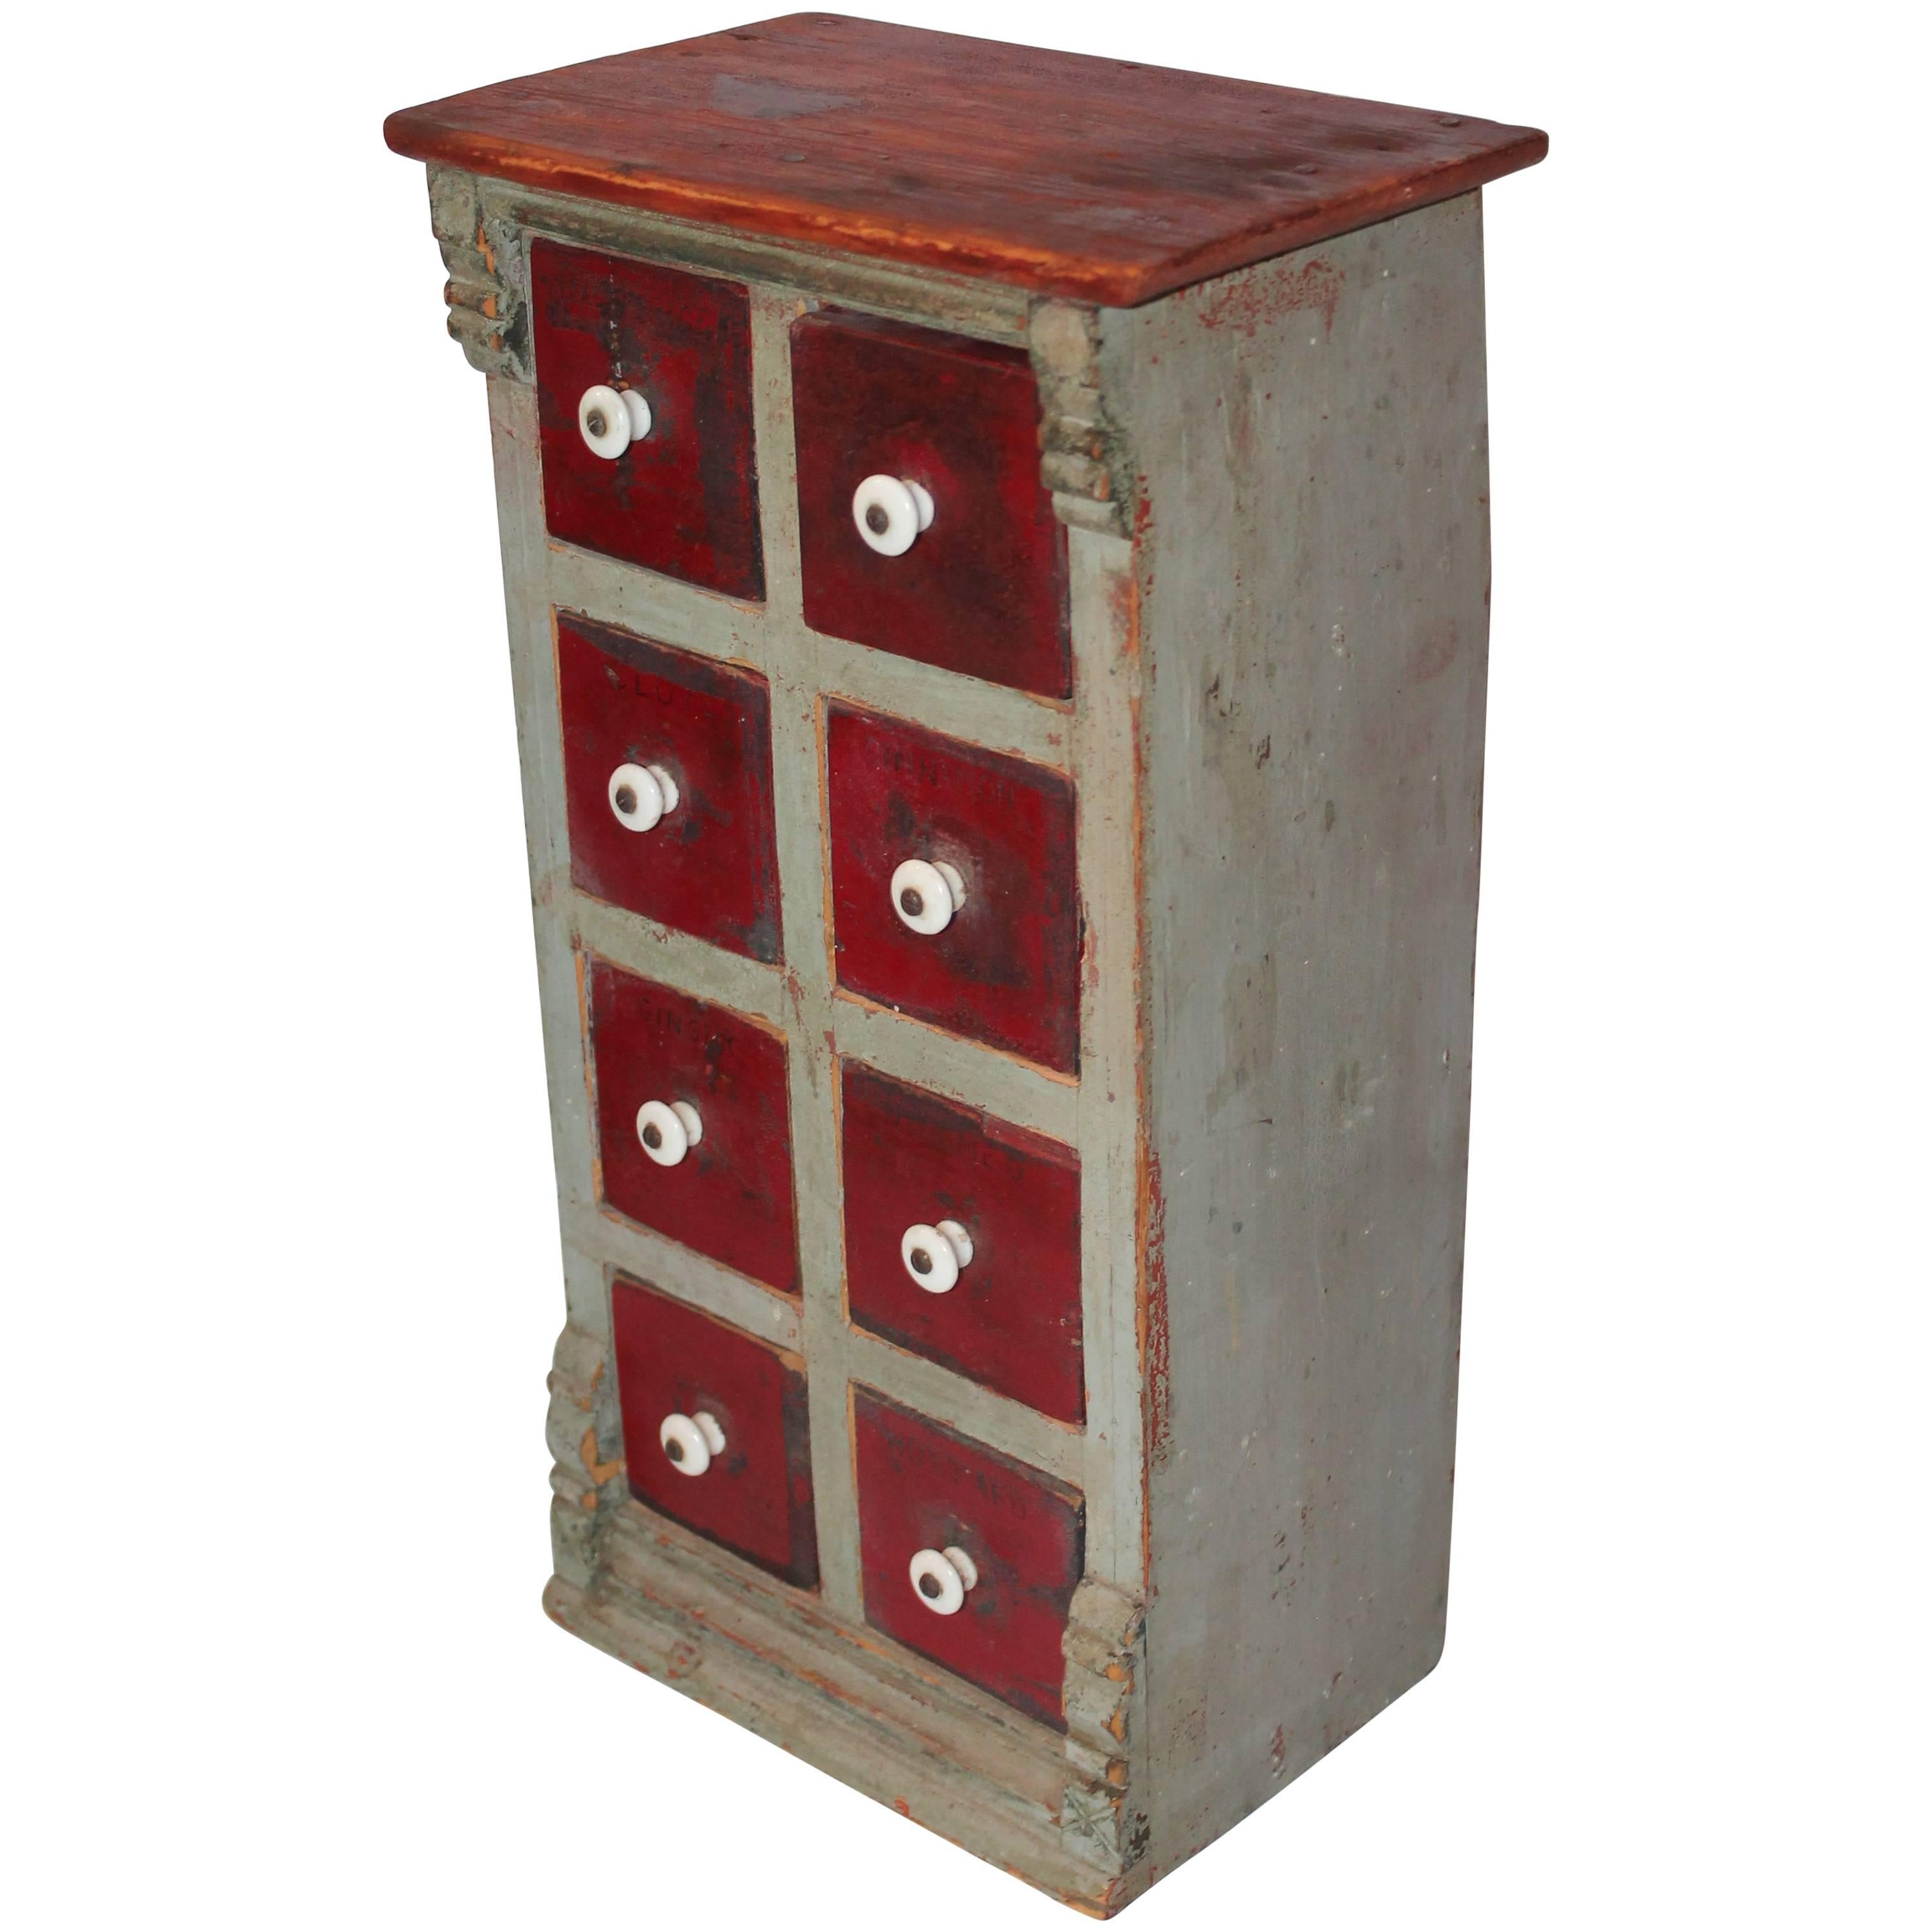 19th Century Original Painted Spice Box from Maine